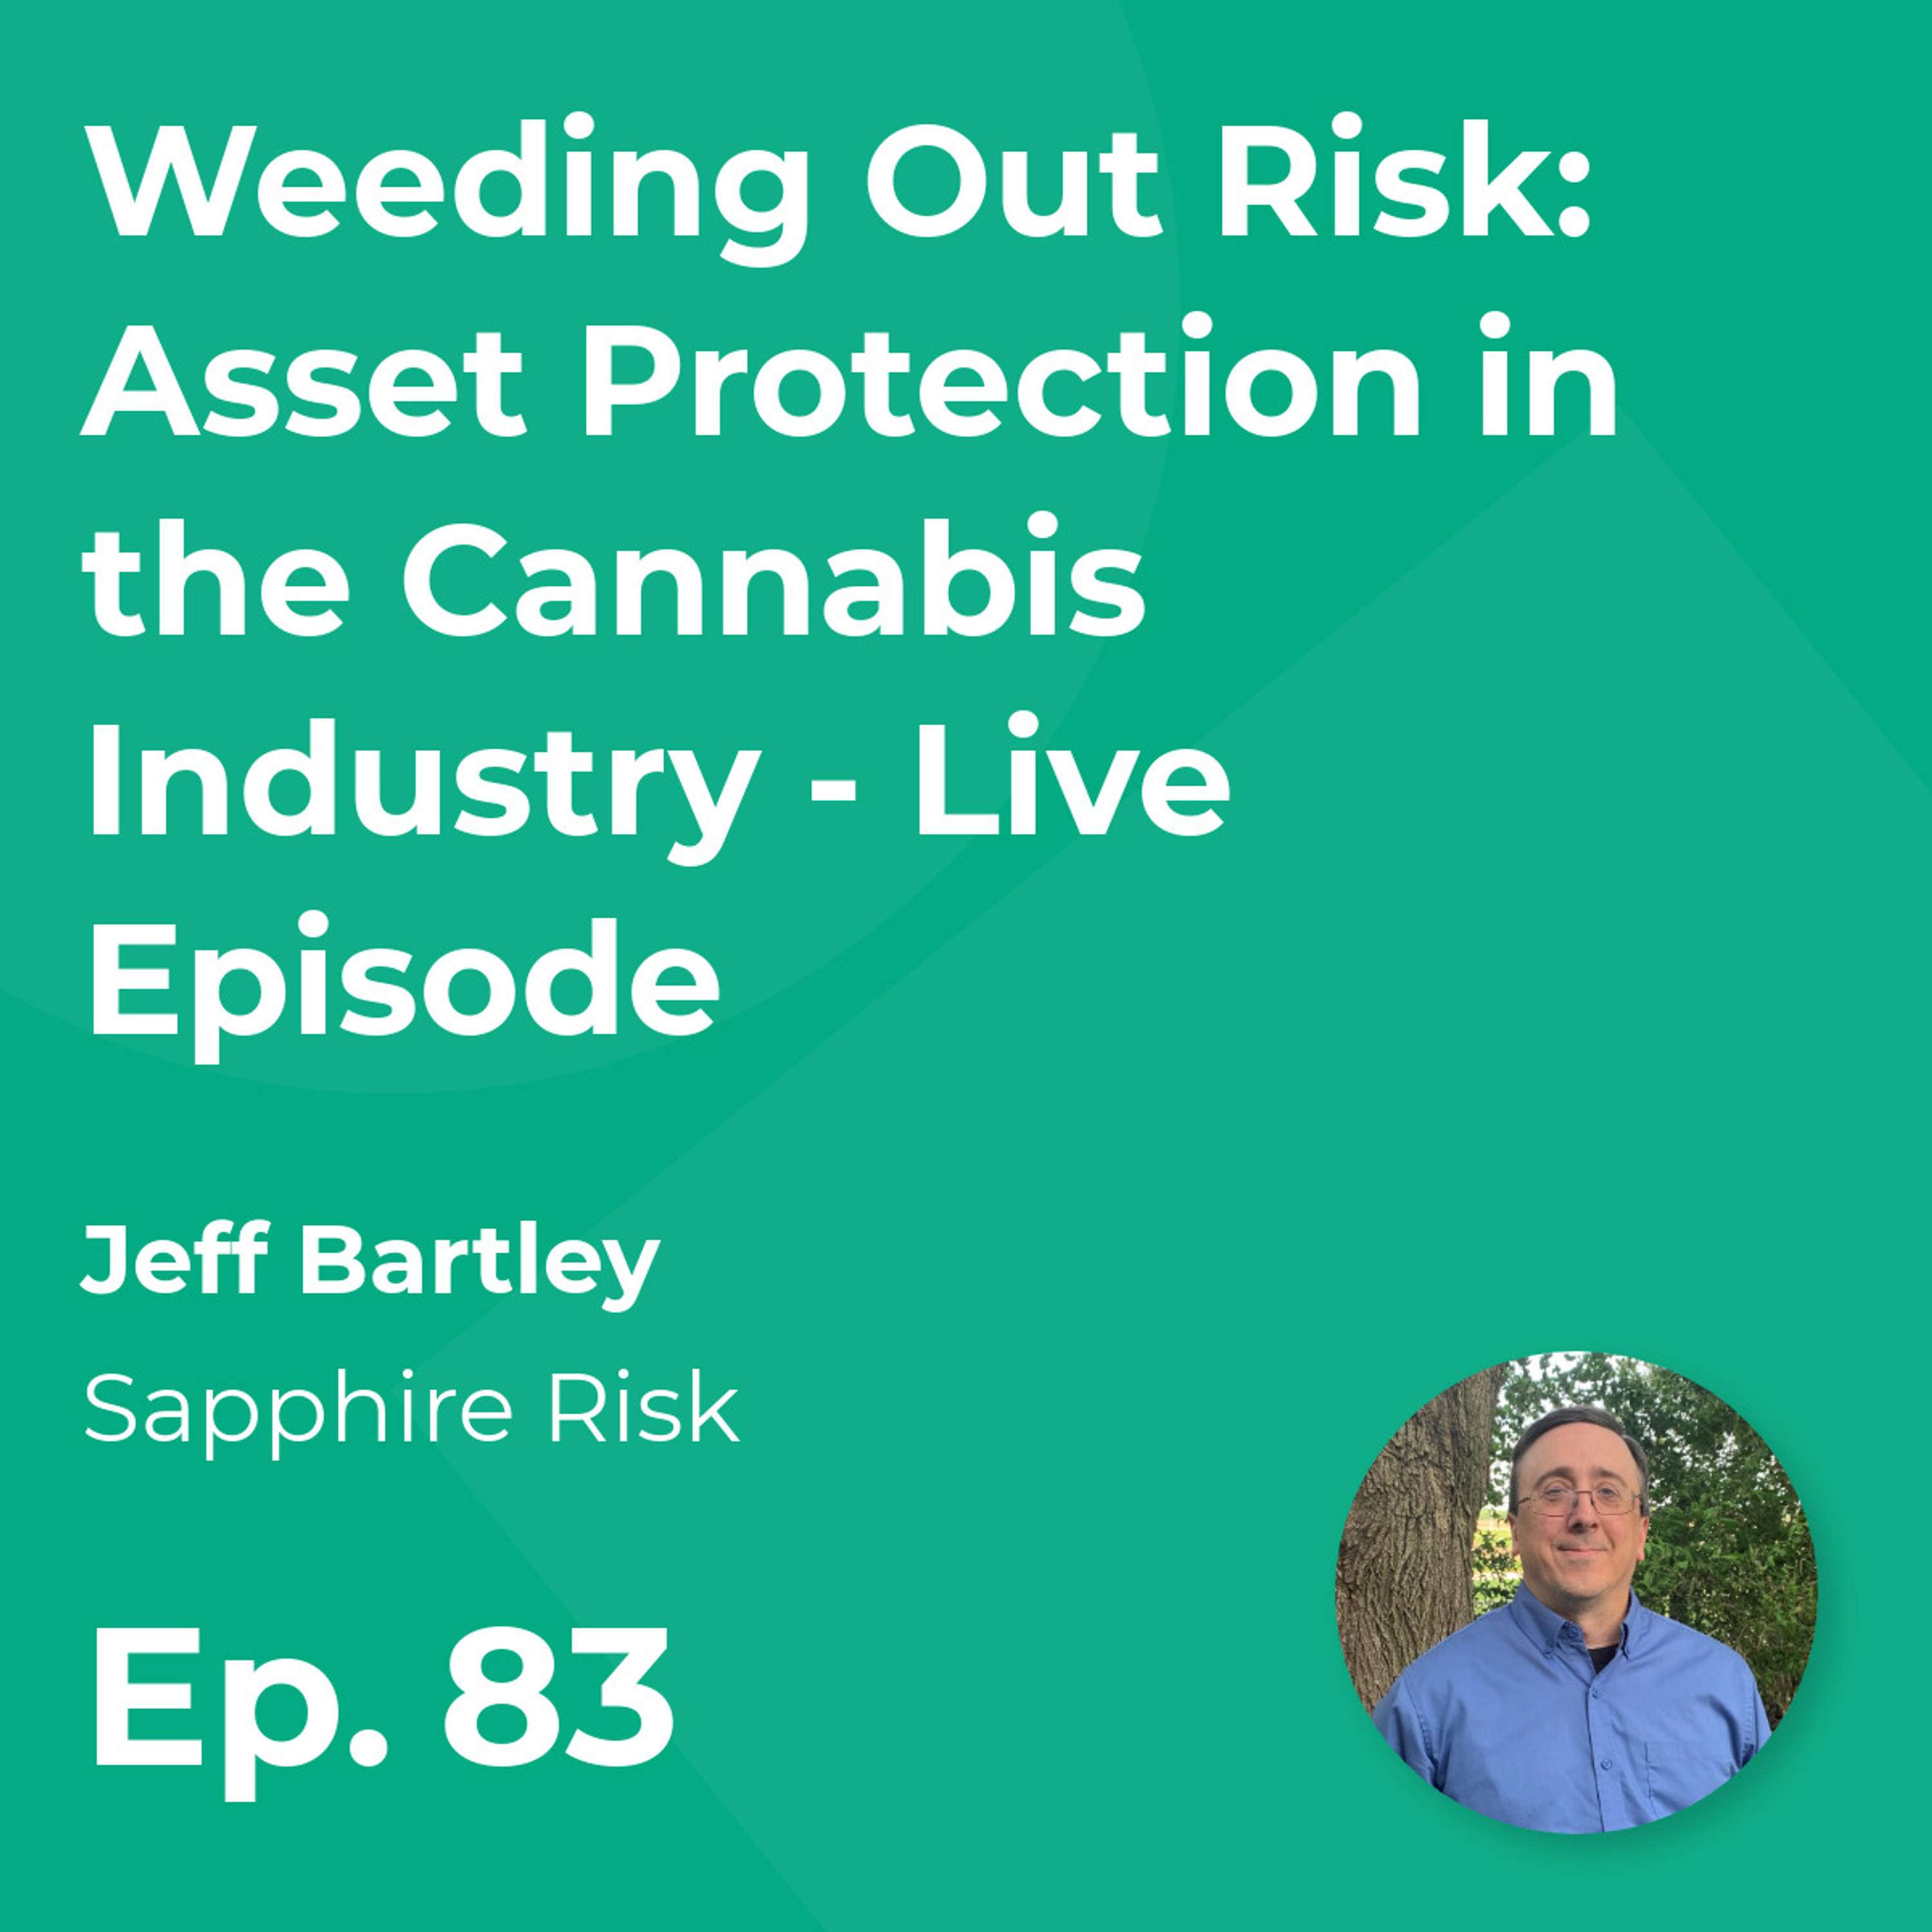 Weeding Out Risk: Asset Protection in the Cannabis Industry - Live Episode